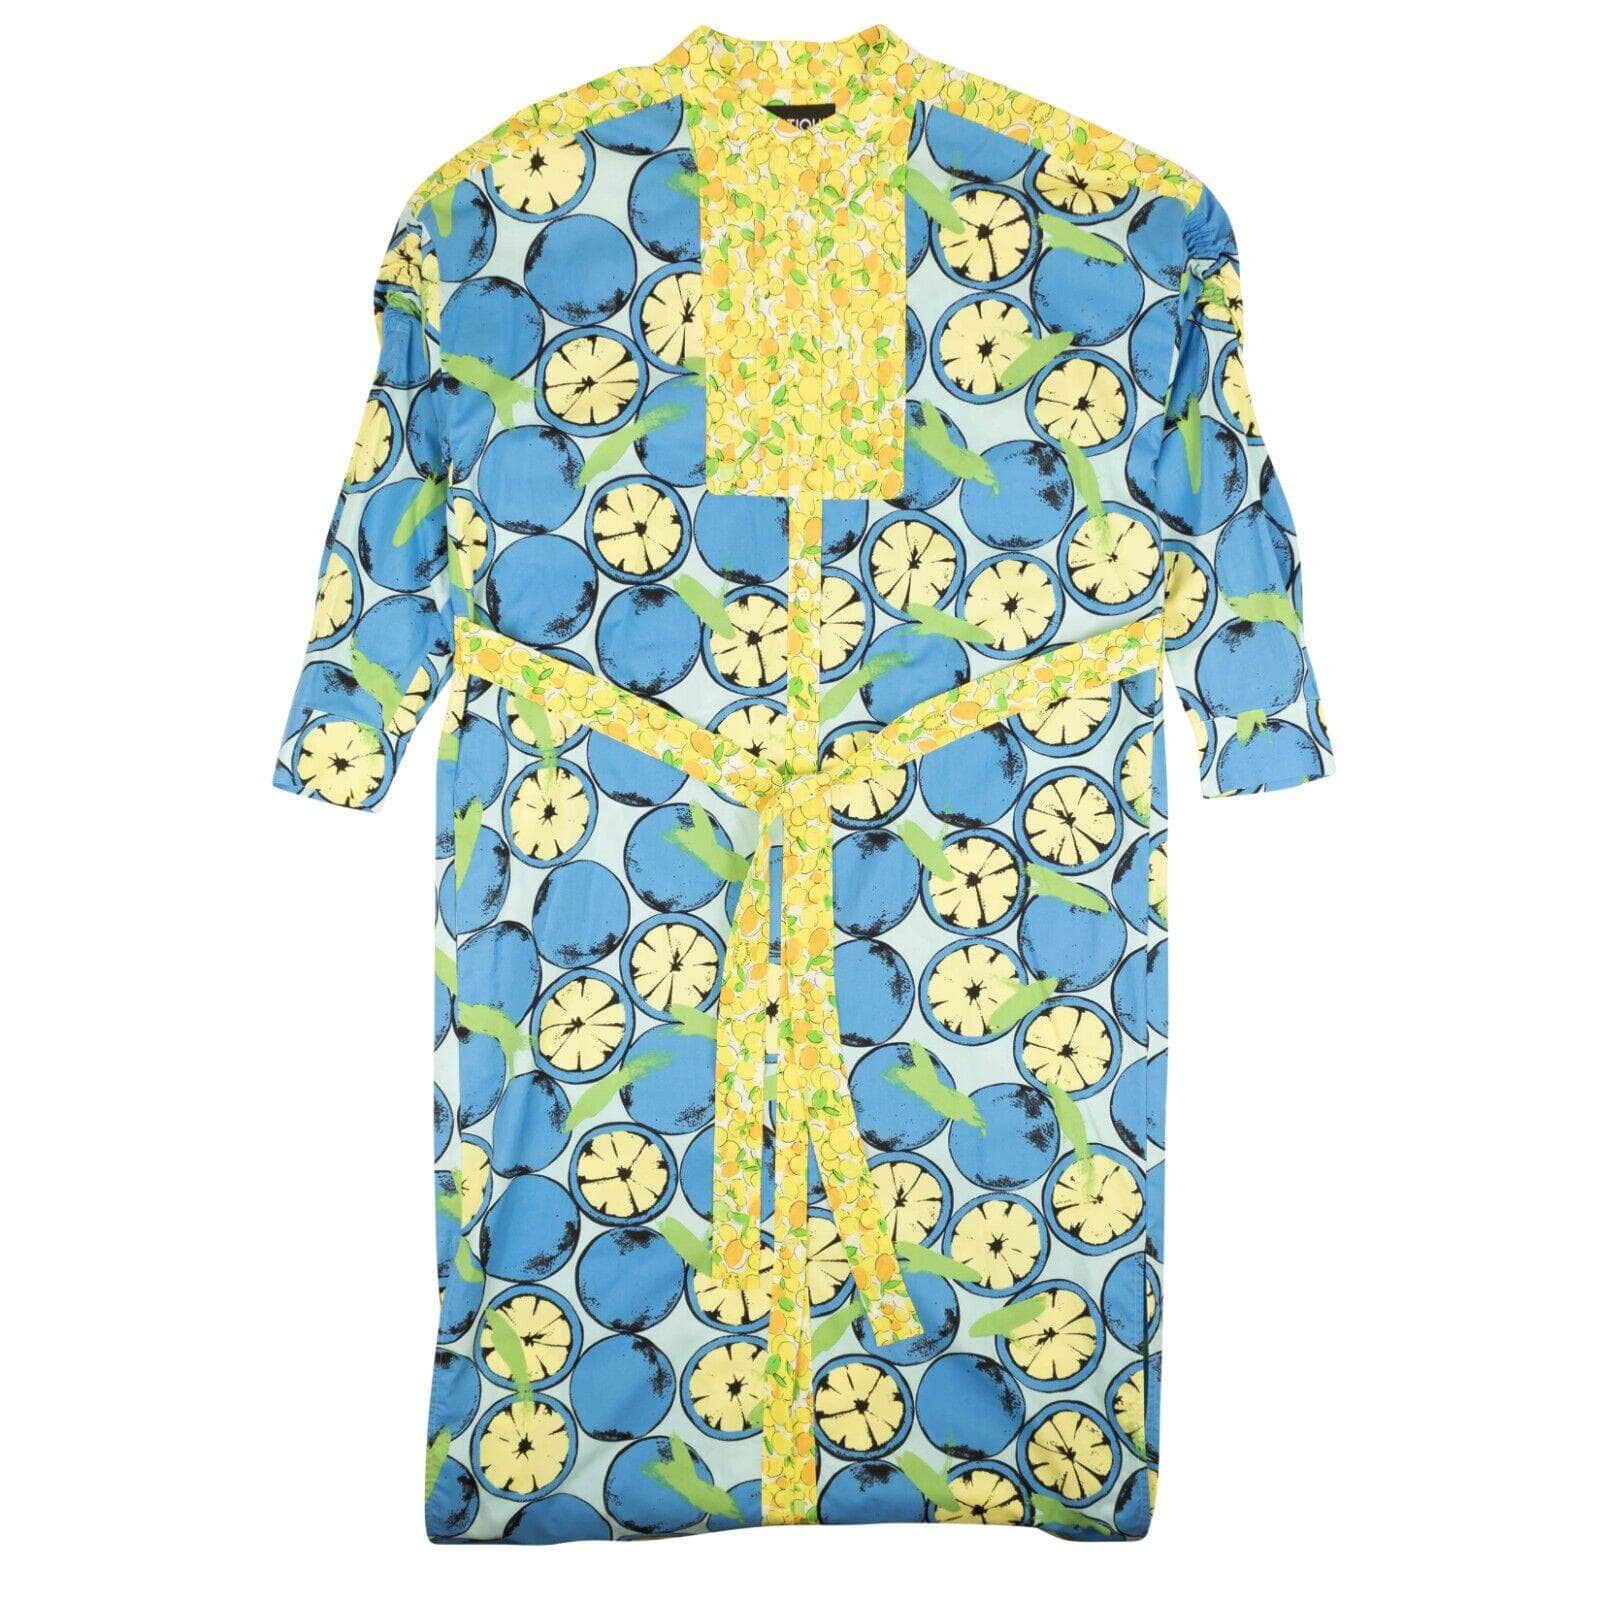 BOUTIQUE MOSCHINO 250-500, boutique-moschino, channelenable-all, chicmi, couponcollection, gender-womens, main-clothing, size-36, size-38, size-40, size-42, size-46, size-48, womens-day-dresses Multi Lemon Print Silk Pleated Bib Dress